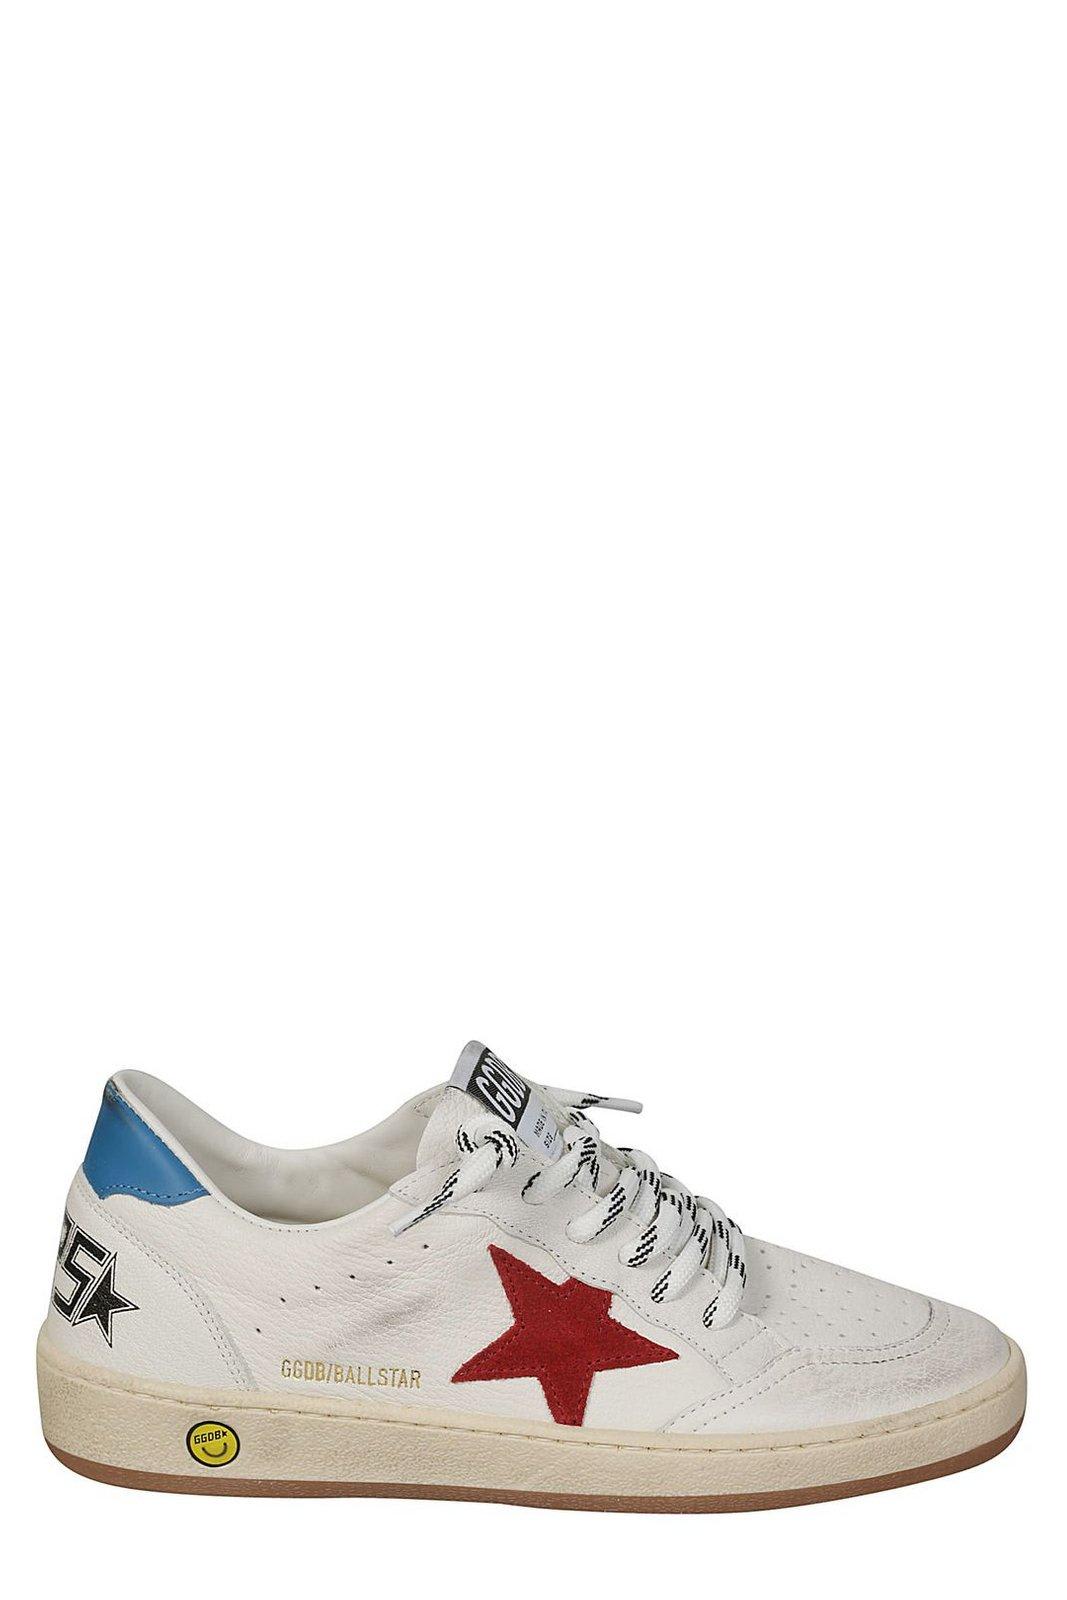 Shop Golden Goose Ball Star-patch Lace-up Sneakers In White/red/blue